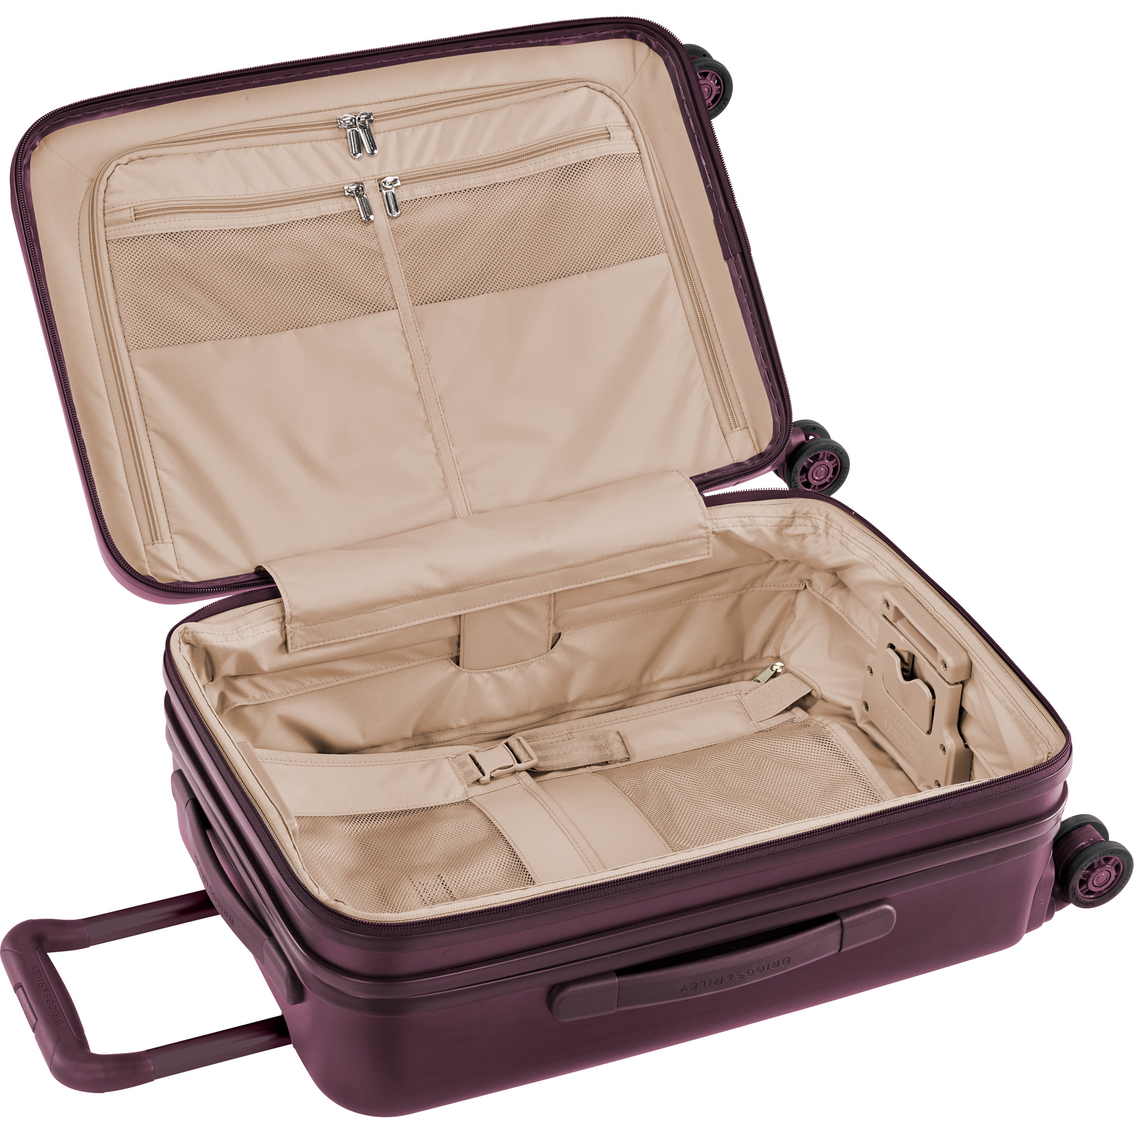 Briggs & Riley Sympatico Domestic Carry On Spinner | Luggage | Clothing ...